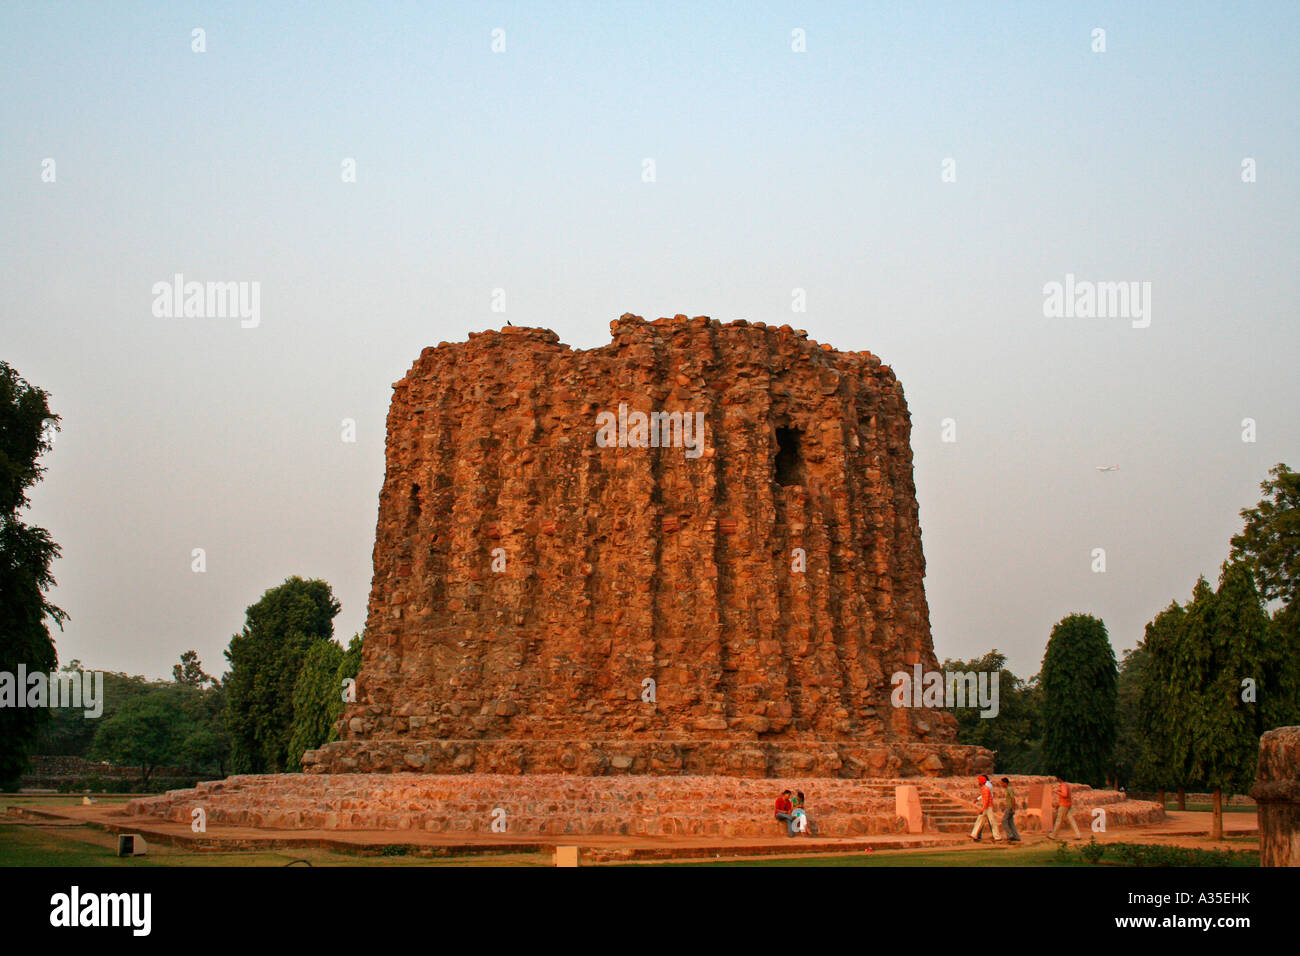 Ruins of an unfinished tower near Qutb Minar complex in New Delhi India Stock Photo